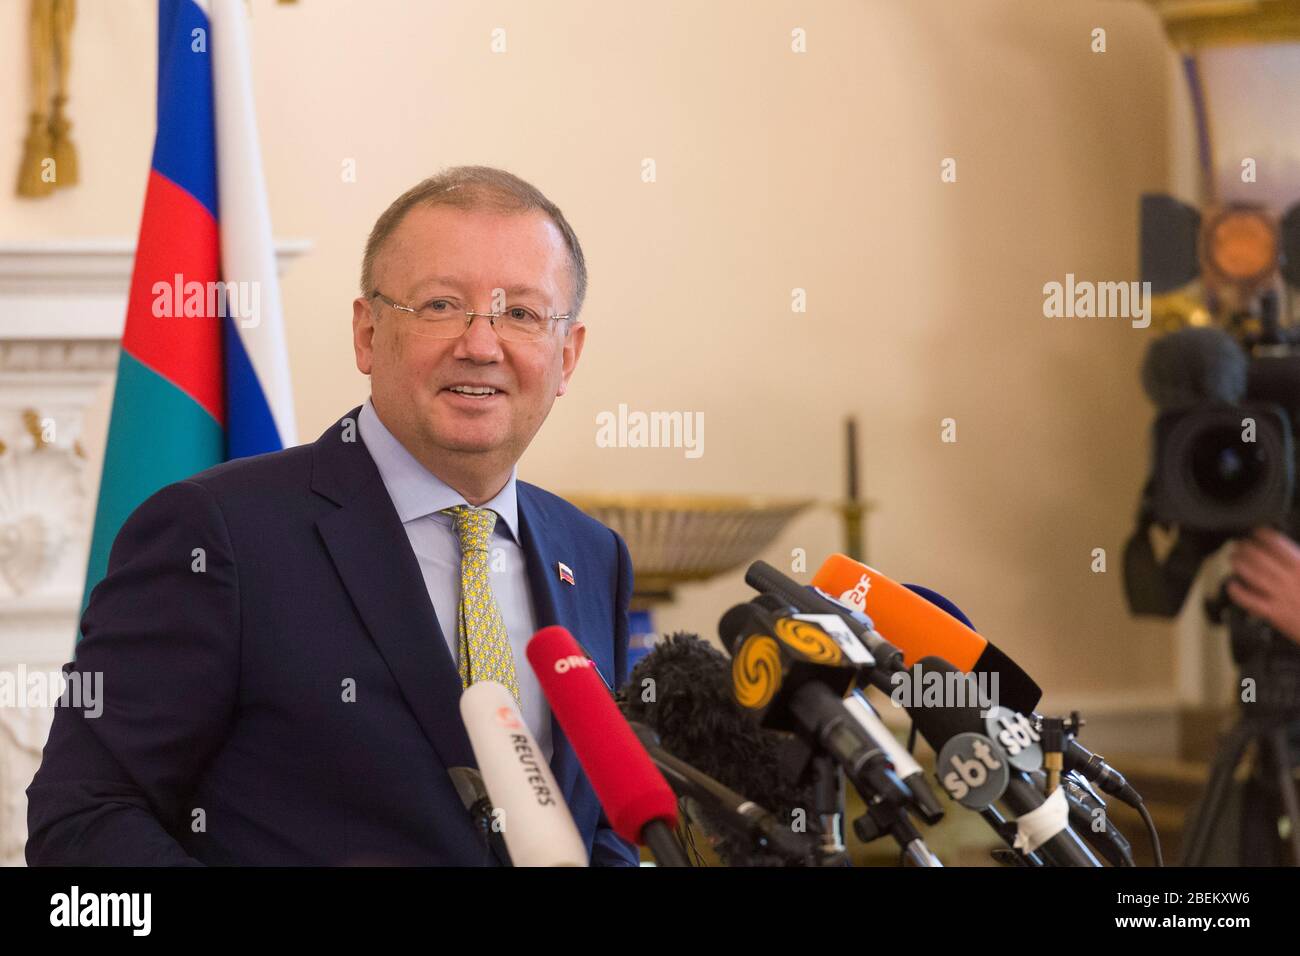 Russian Ambassador to United Kingdom, Alexander Vladimirovich Yakovenko holding a press conference where he spoke about the poisoning Sergei and Yulia Stock Photo